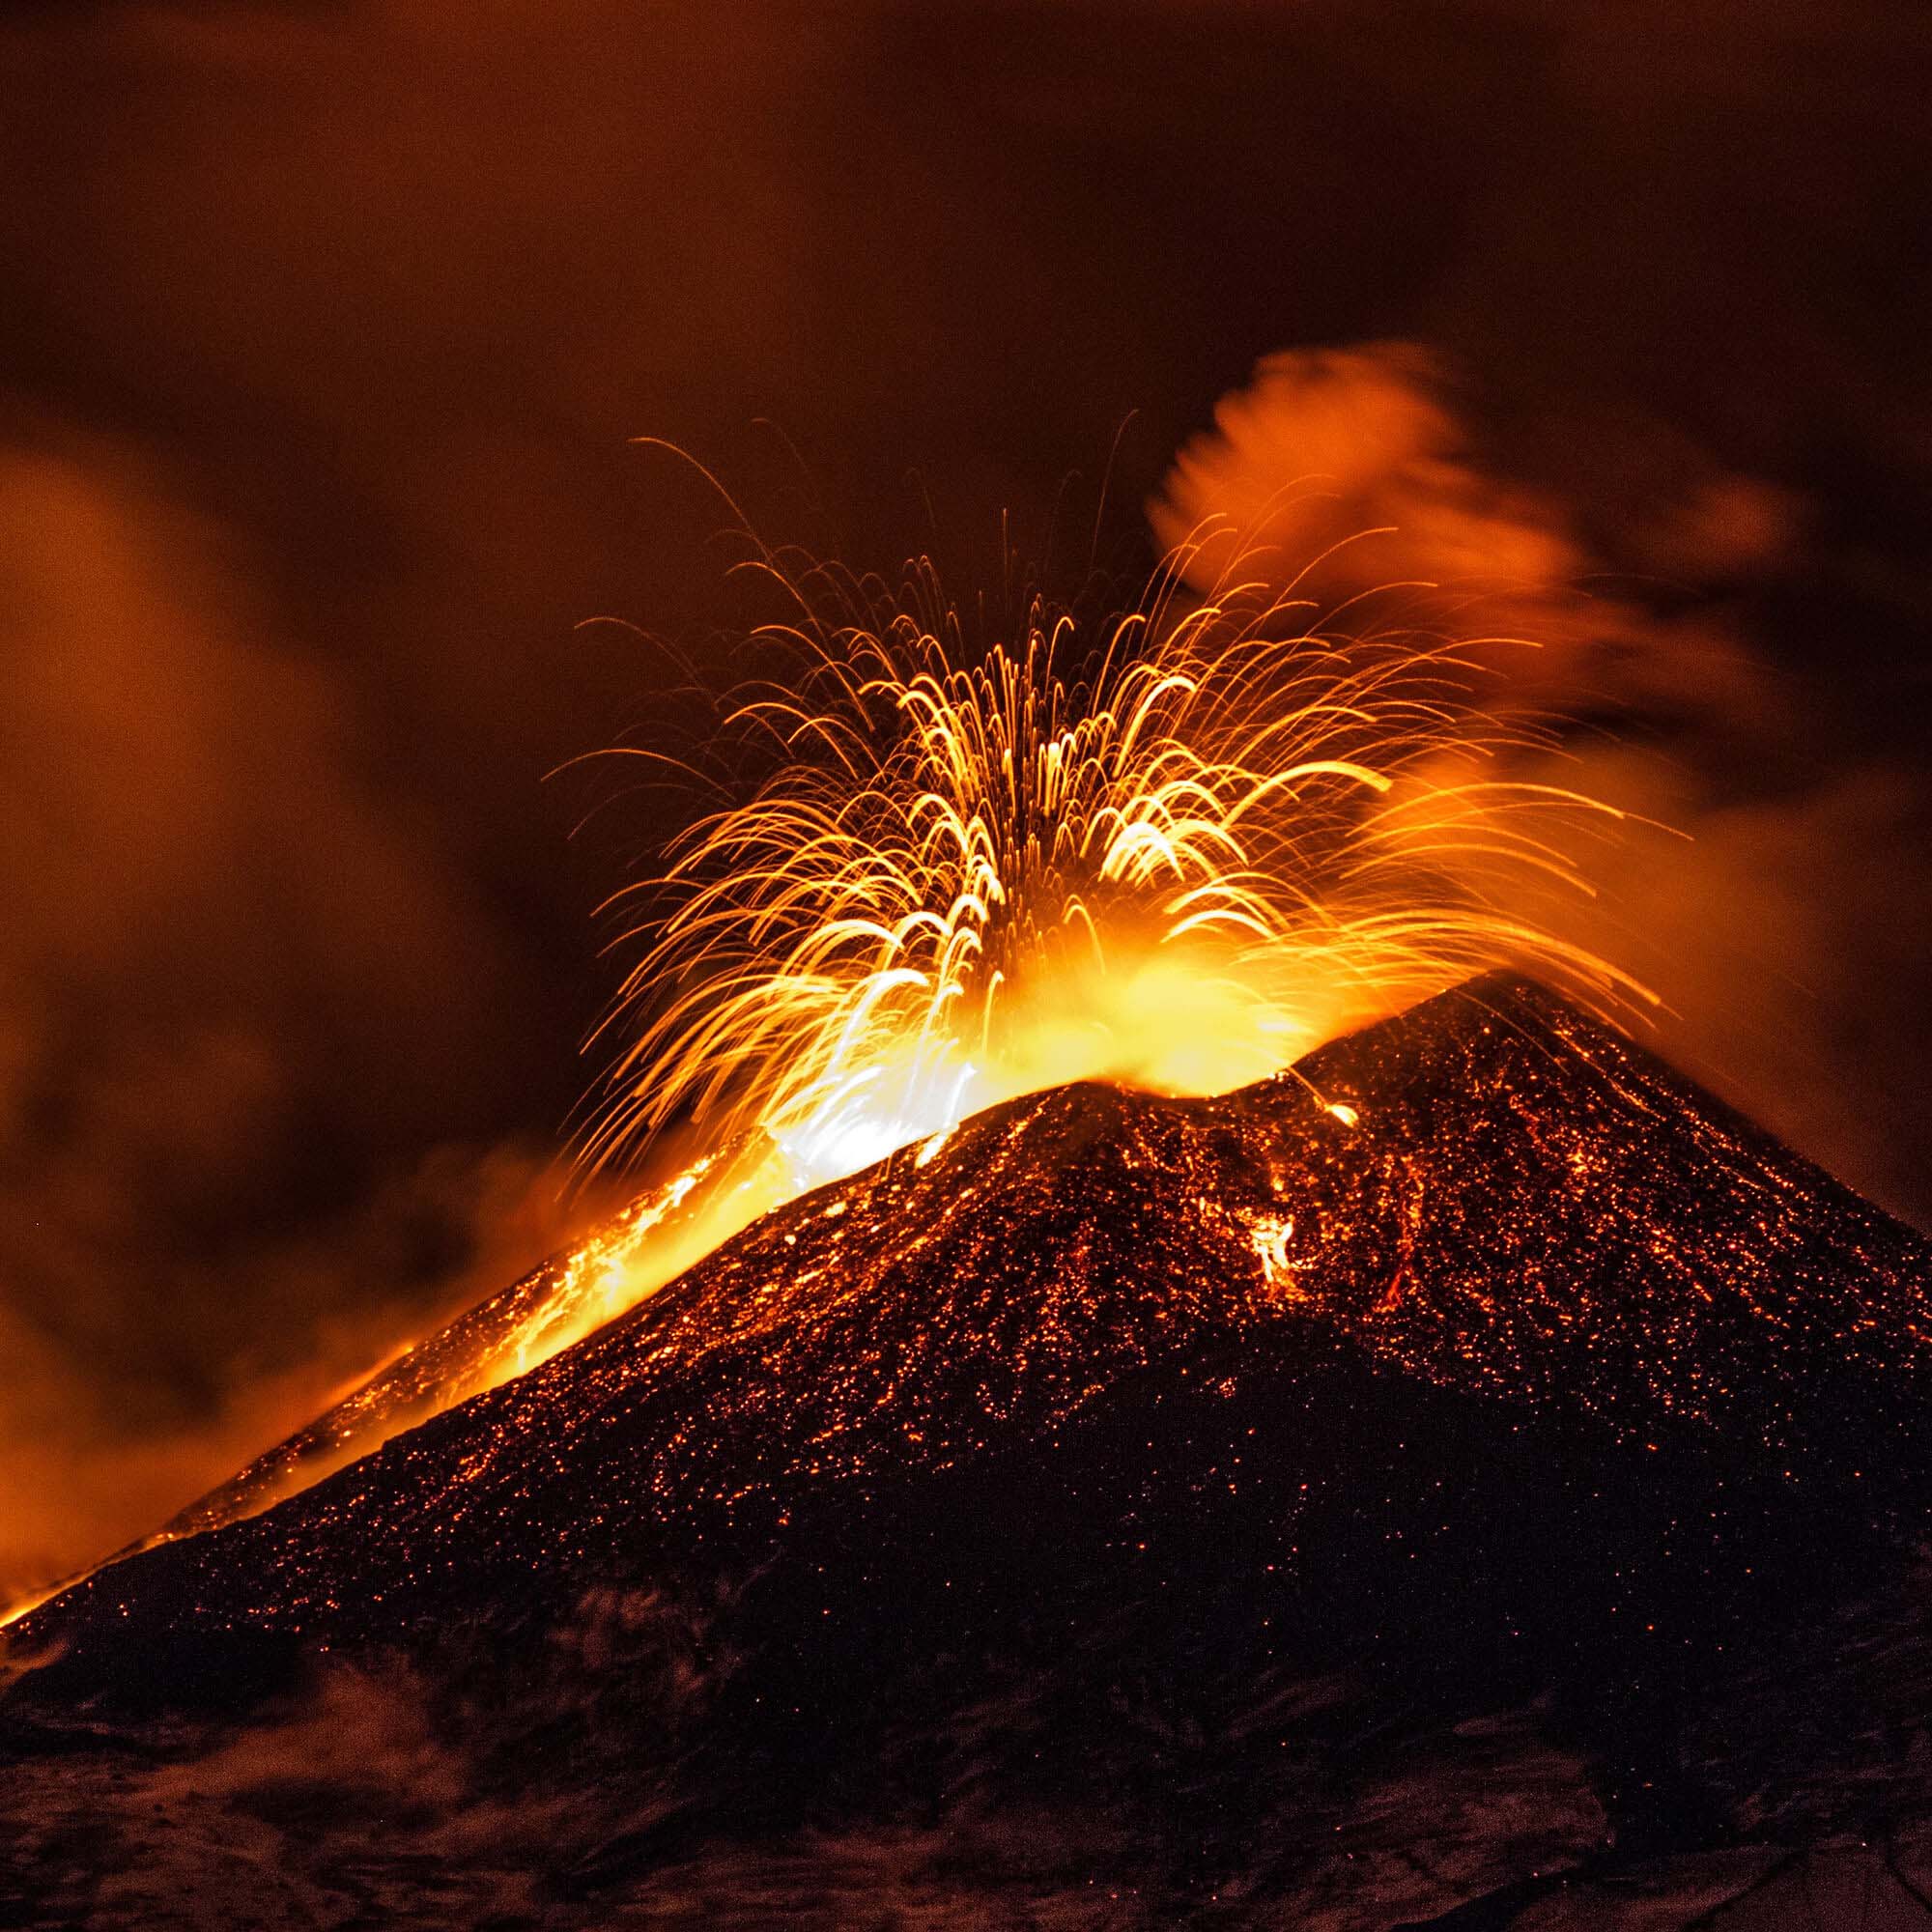 A volcano eruption, the miracle diamond creation